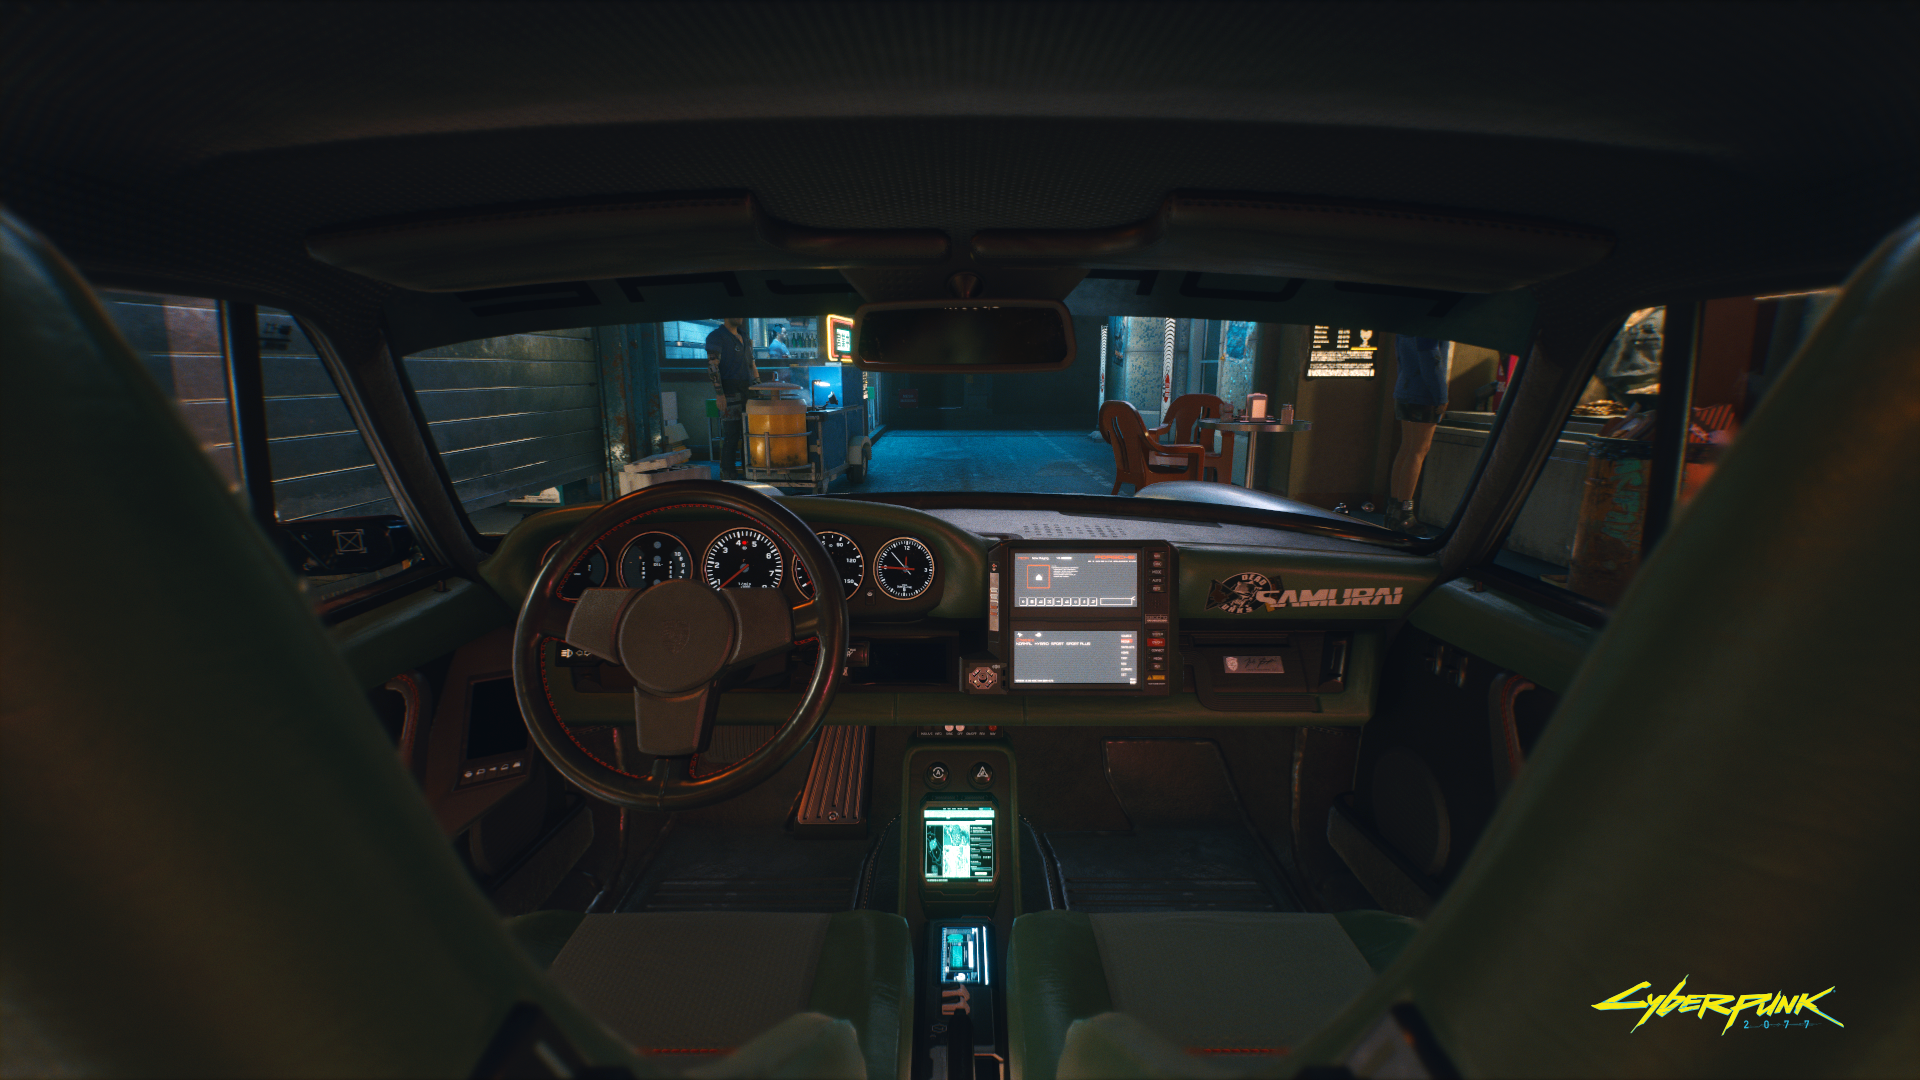 The interior of the Porsche 911 Turbo from Cyberpunk 2077